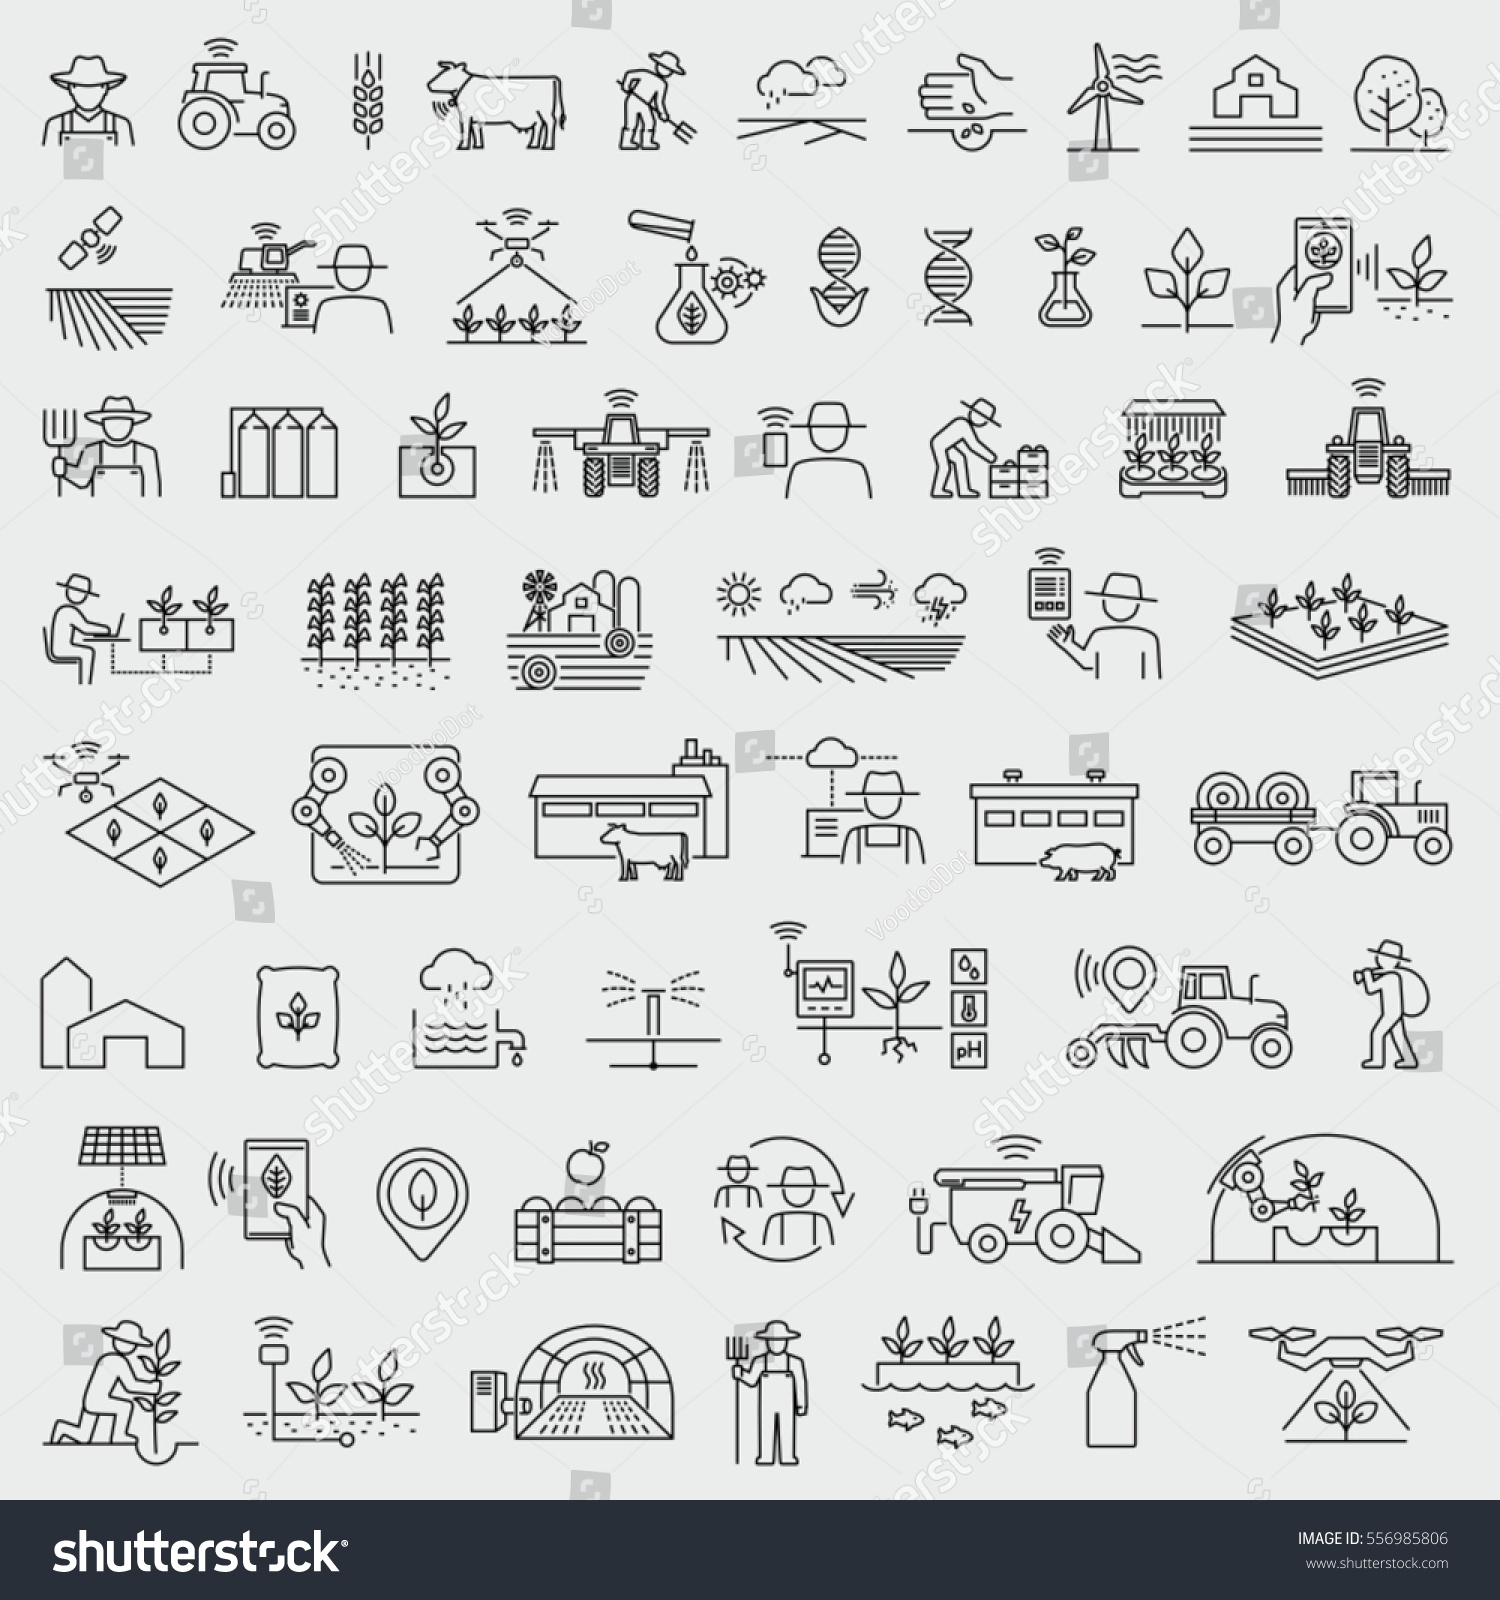 Smart farming and agriculture thin line vector icons set #556985806